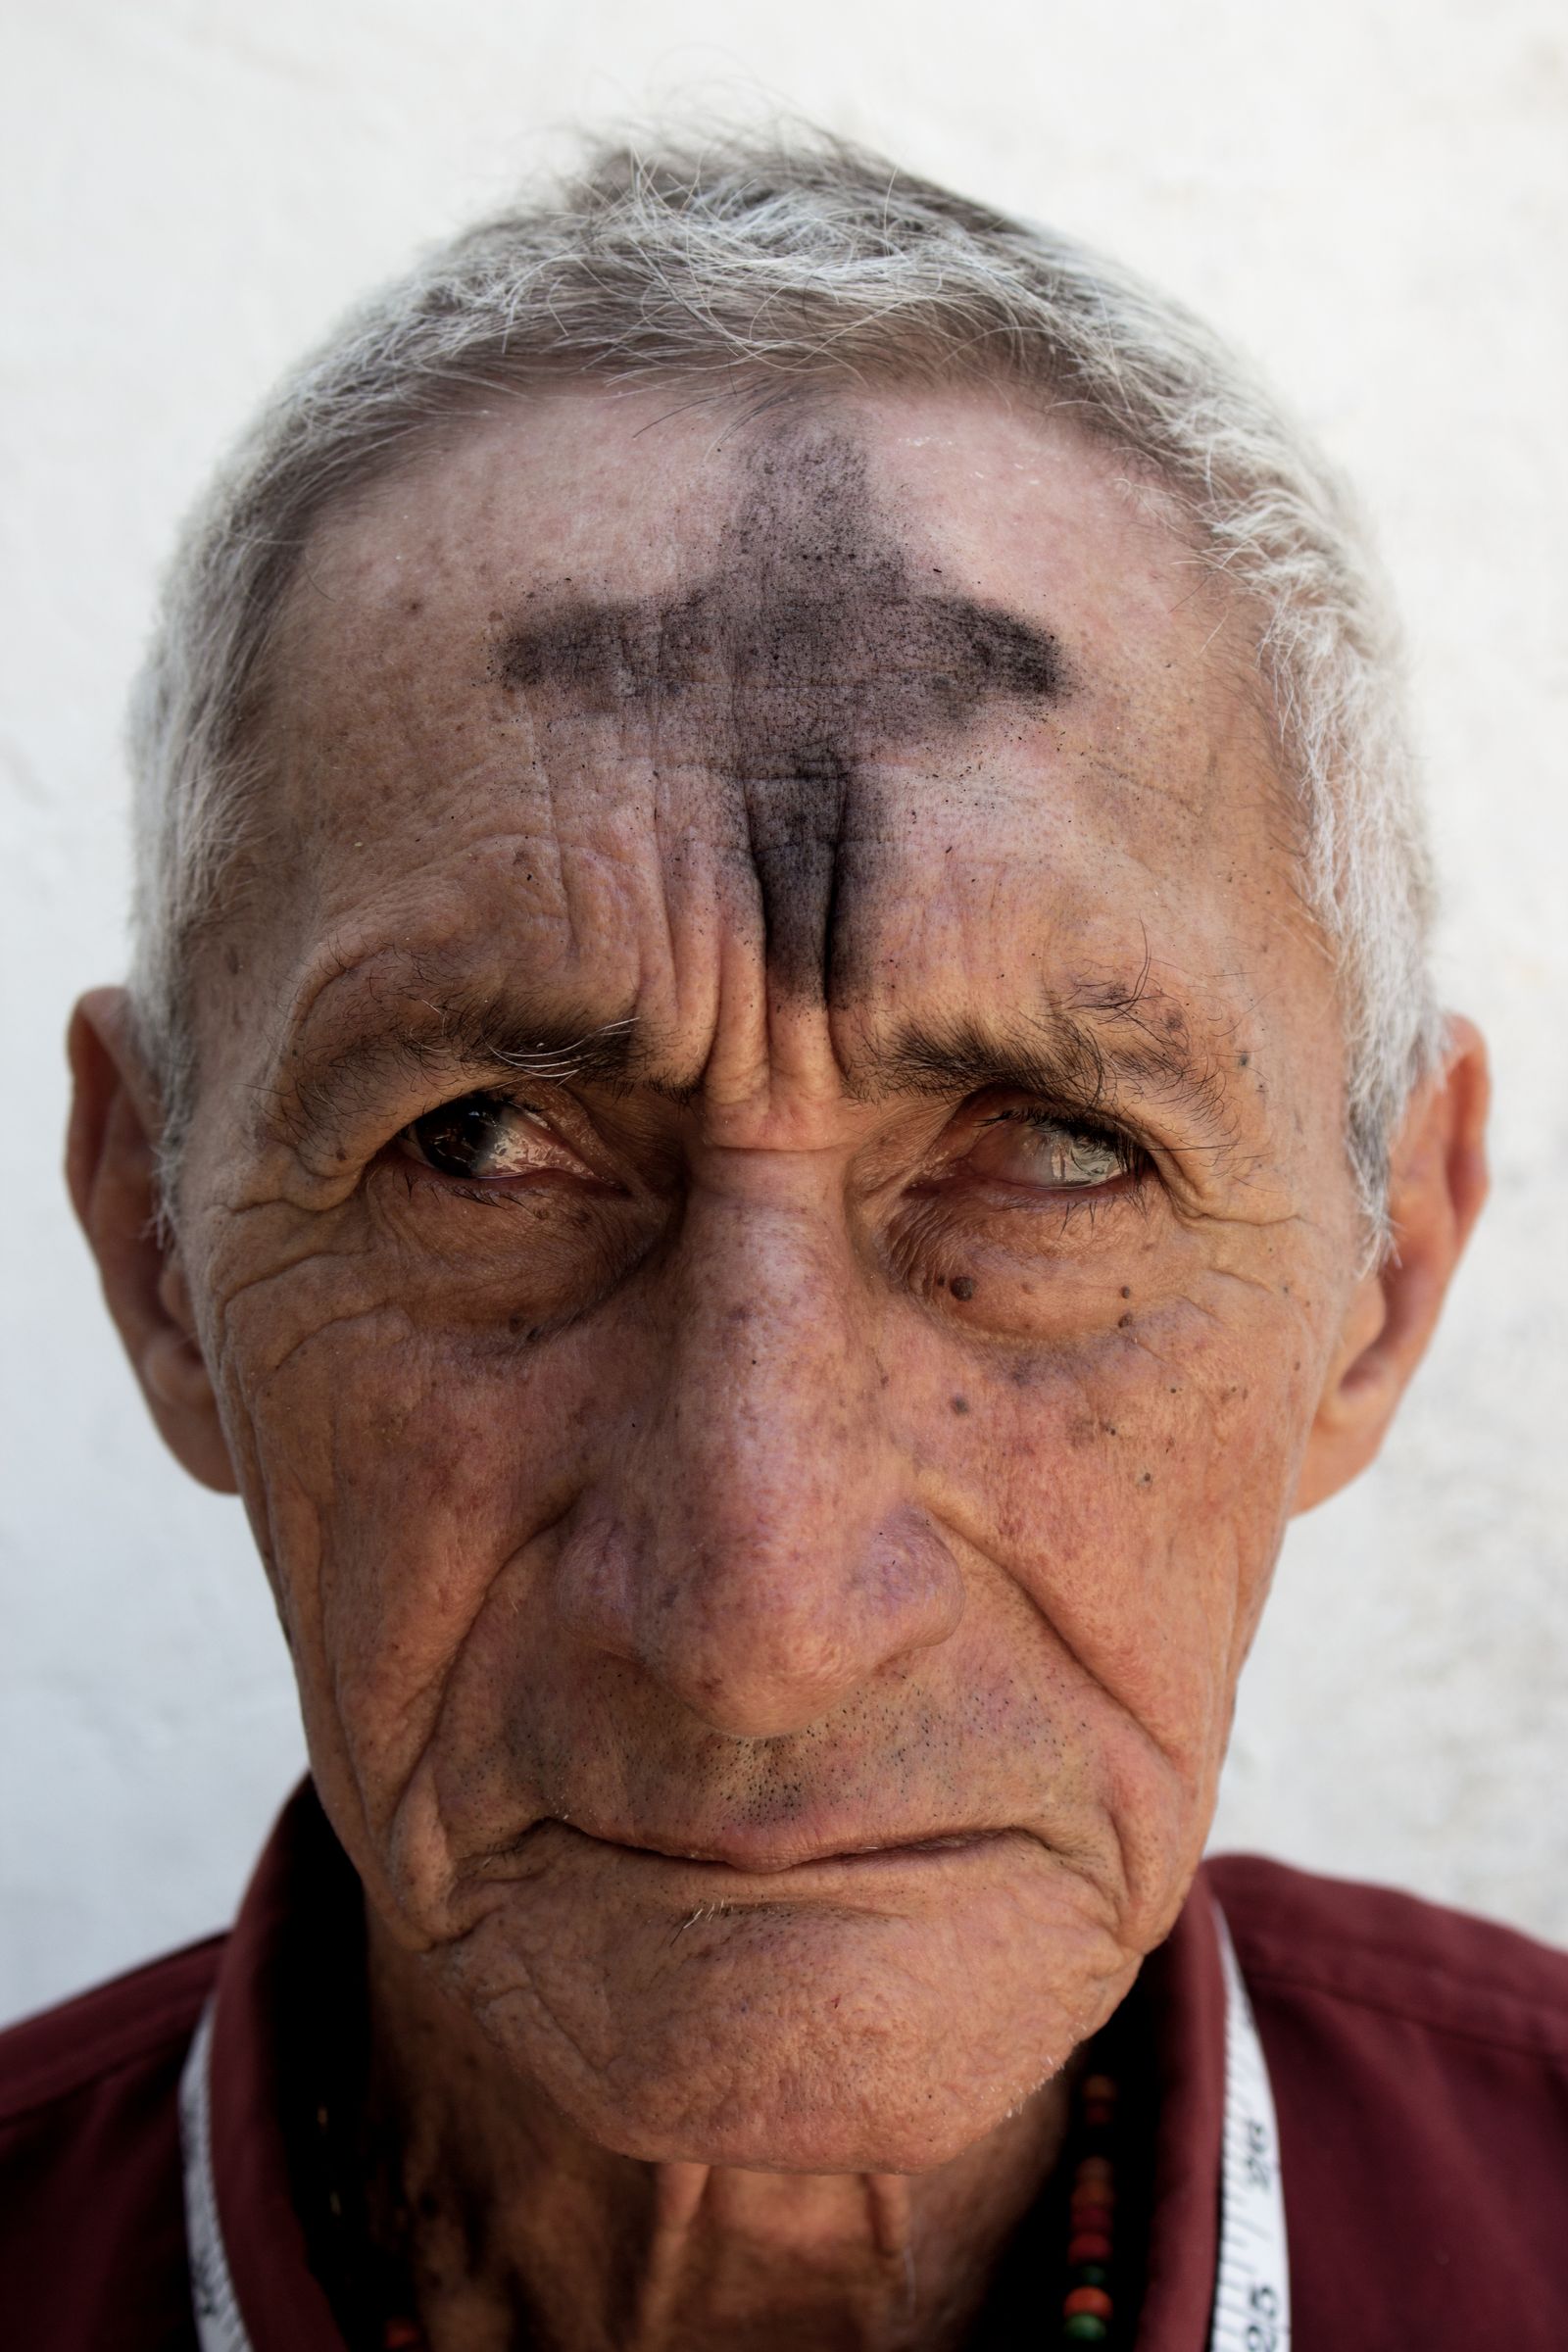 © Luis Cobelo - The cross of death marked on his forehead